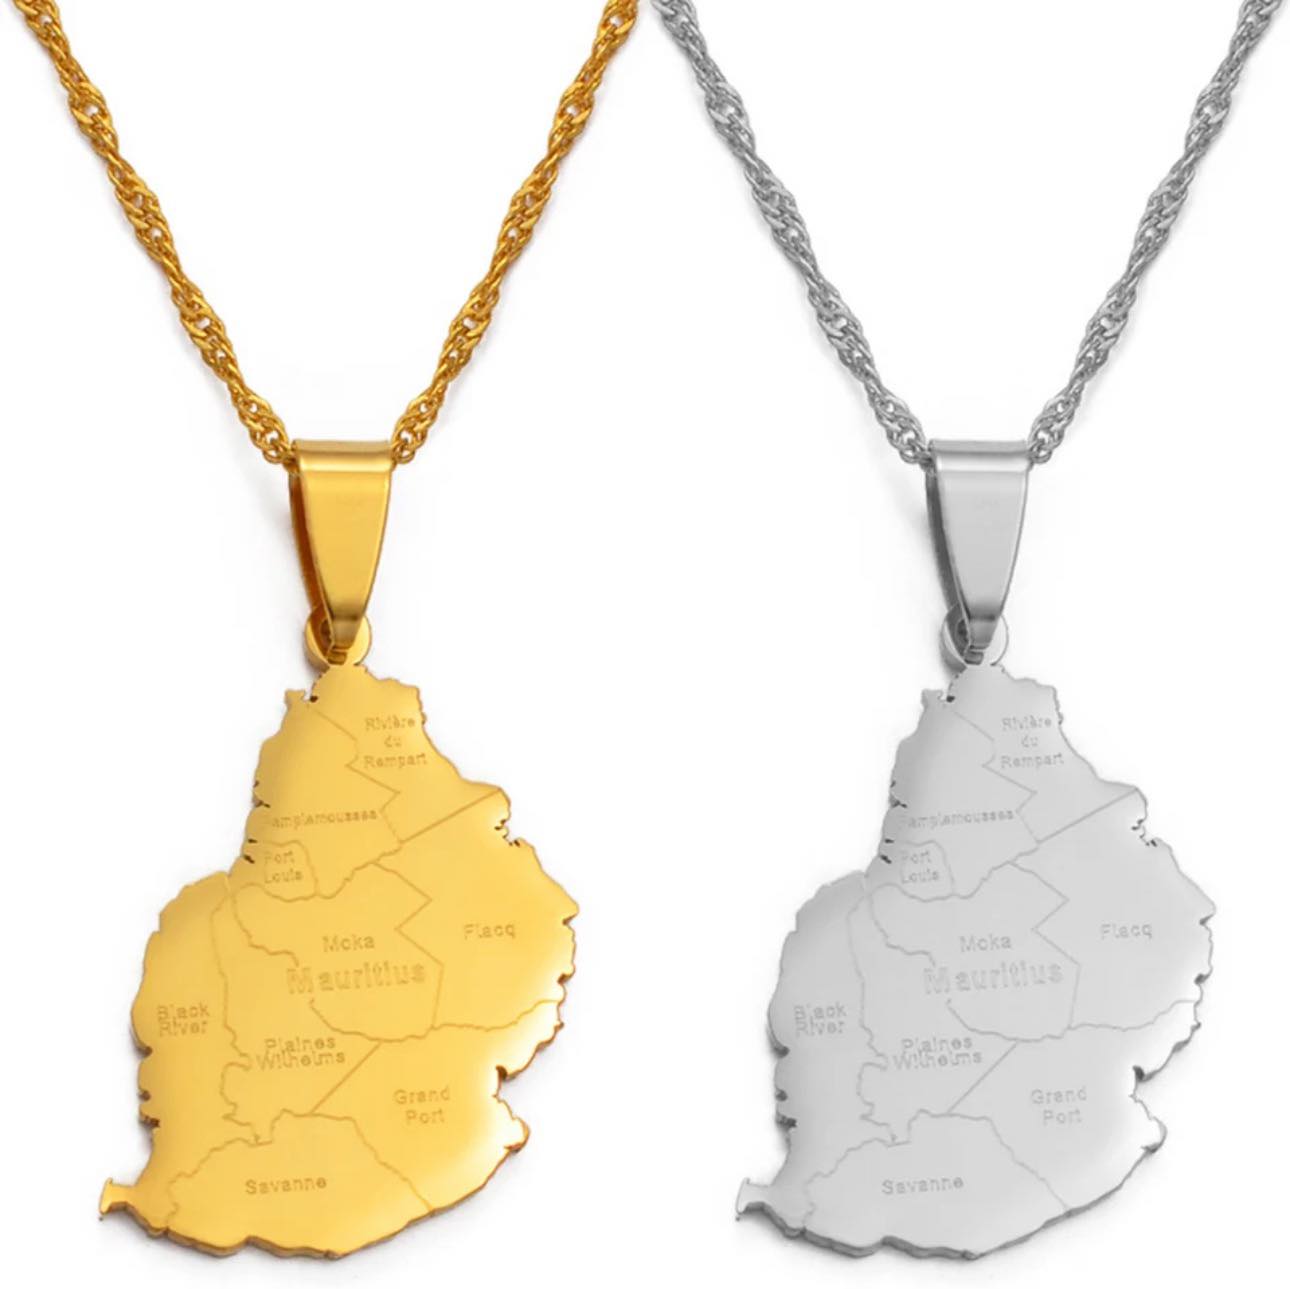 Mauritius Map & Cities Necklace